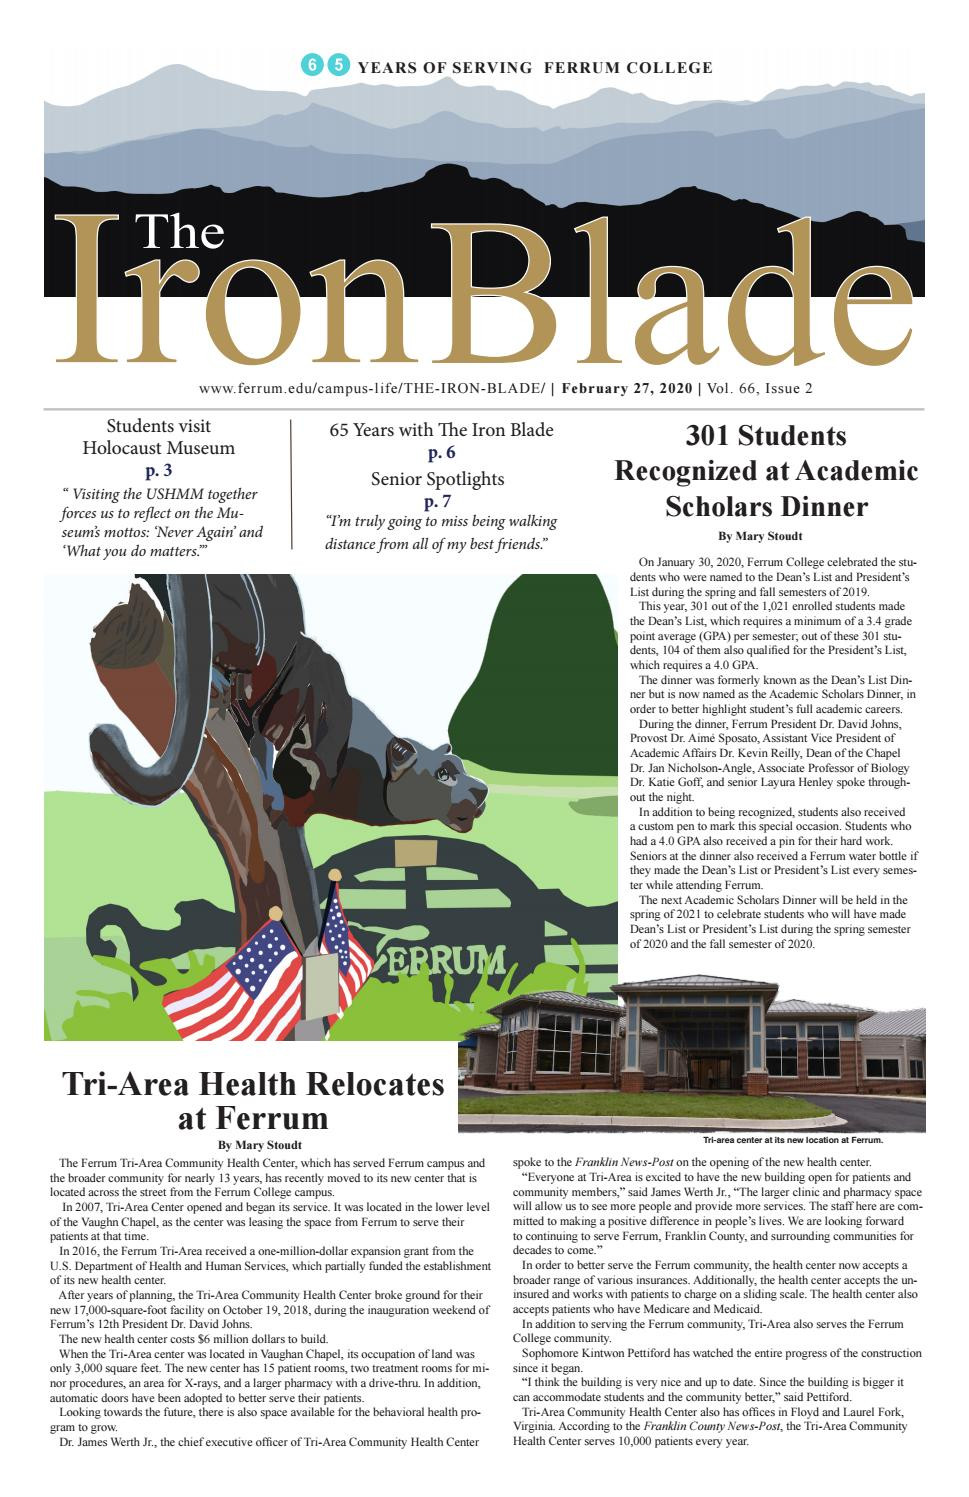 Ferrum College Career Services Resume Samples the Iron Blade – February 2020 by Ferrum College – issuu